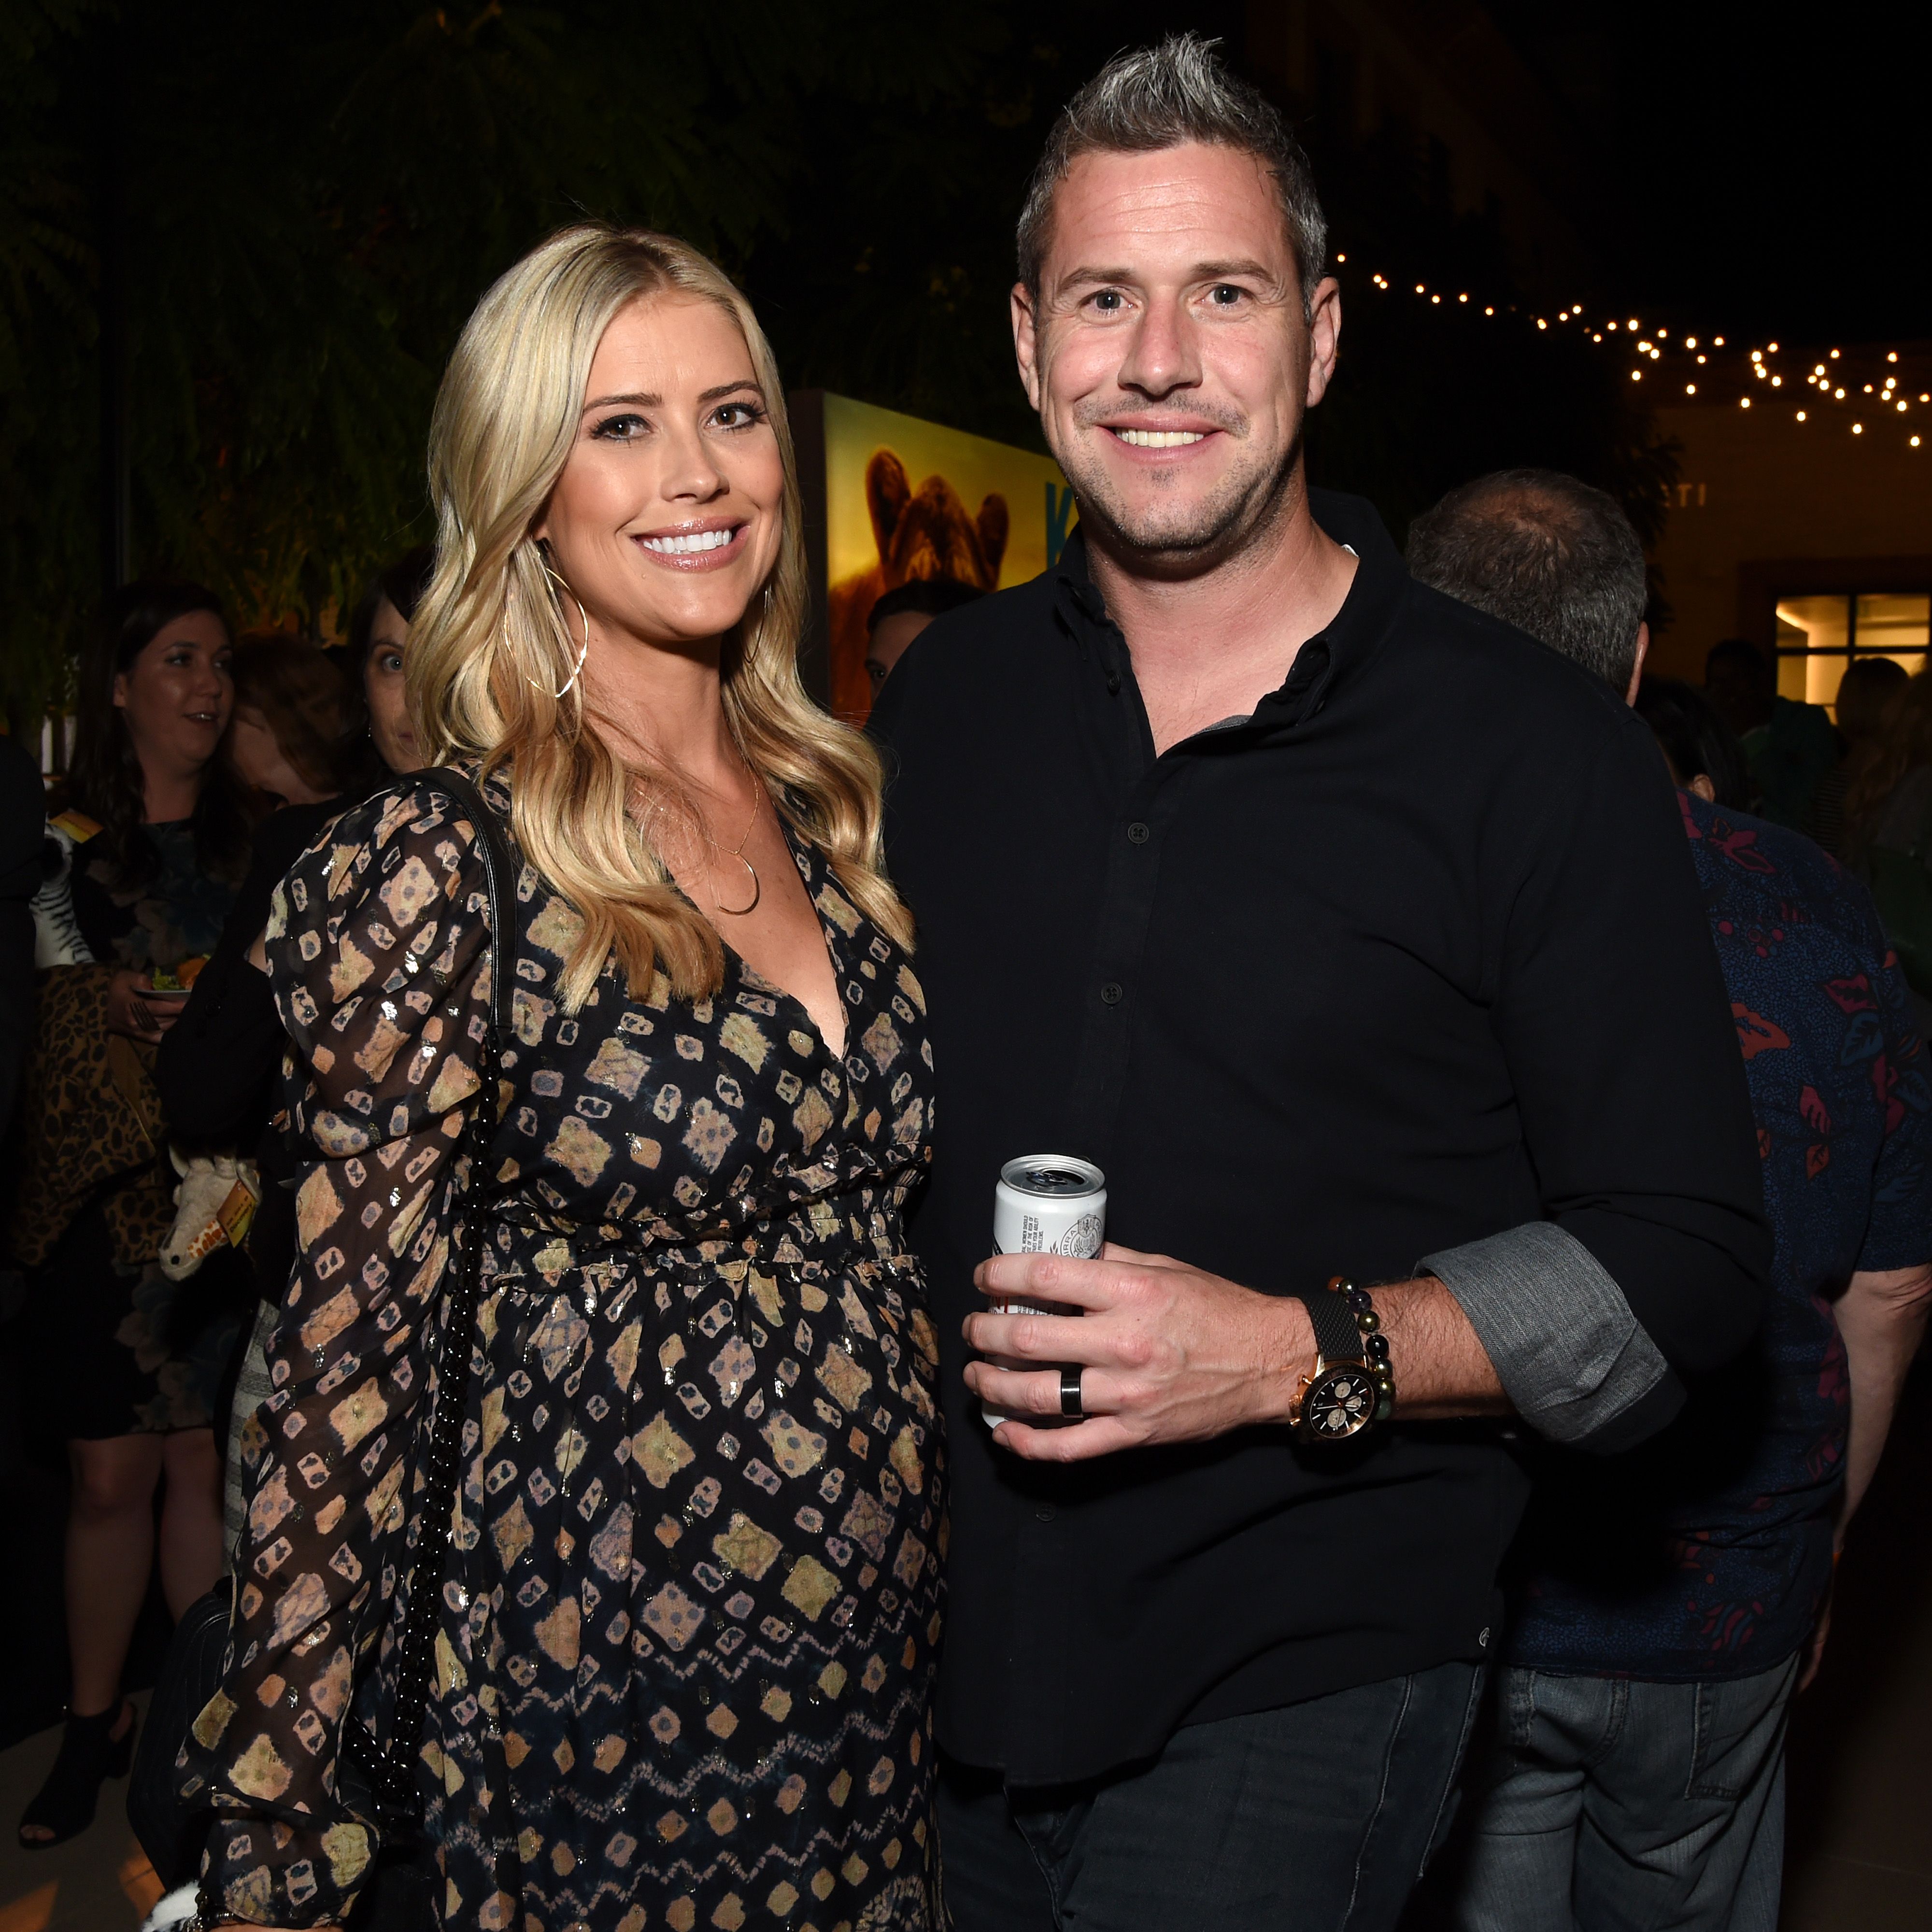 Christina and Ant Anstead at the "Serengeti" premiere on July 23, 2019 in Beverly Hills, California. | Photo: Getty Images